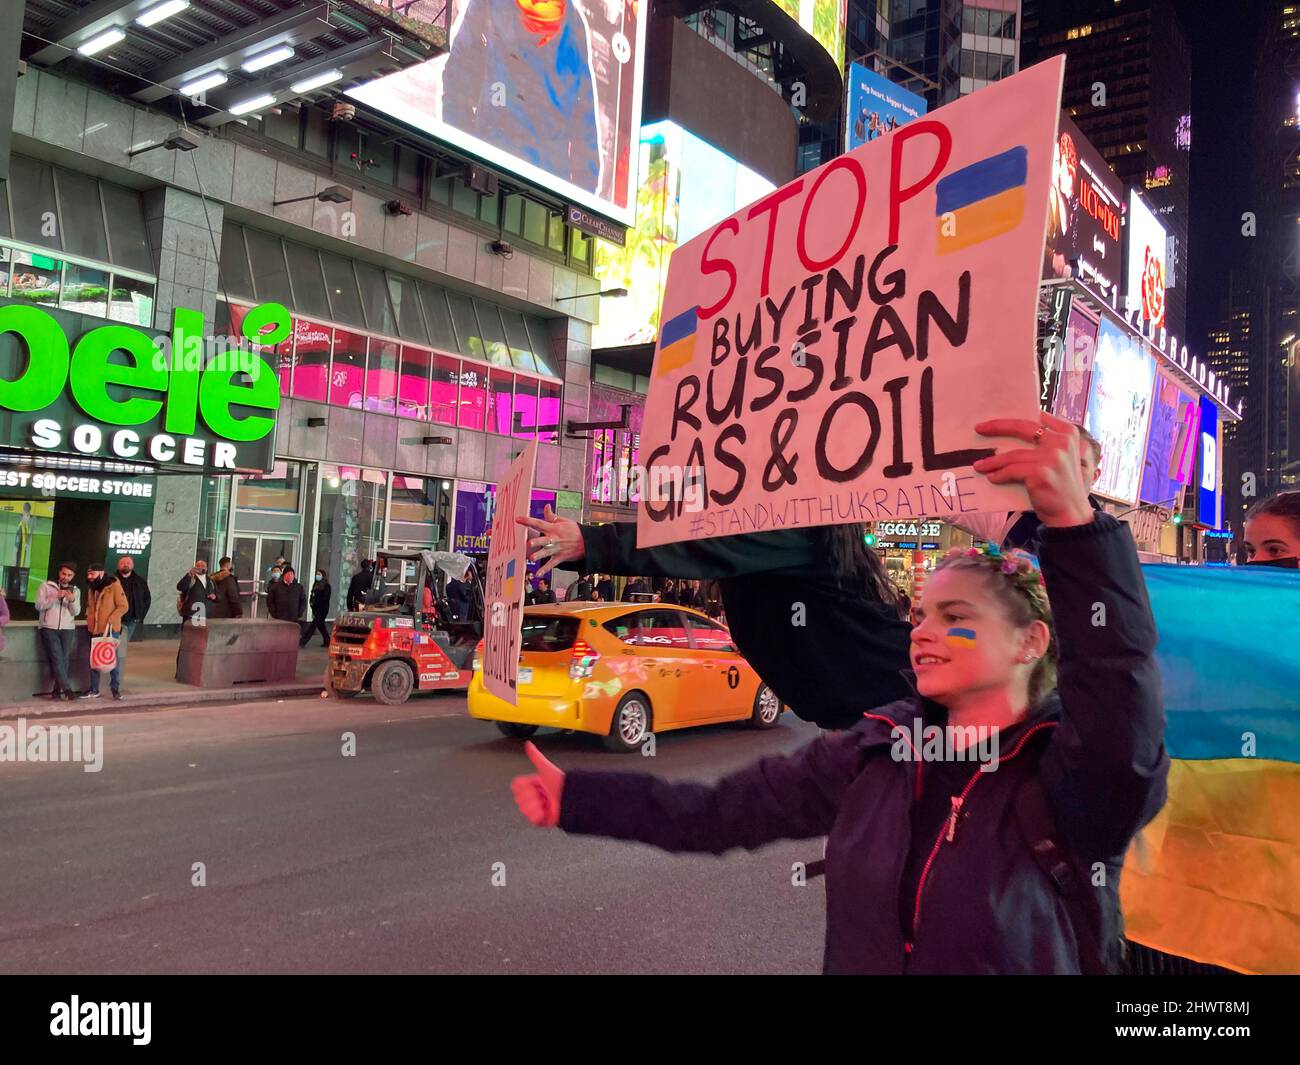 Ukrainian-Americans and their supporters protest the Russian invasion and show support for the citizens of the Ukraine, in Times Square in New York on Wednesday, March 2, 2022. (© Frances M. Roberts) Stock Photo